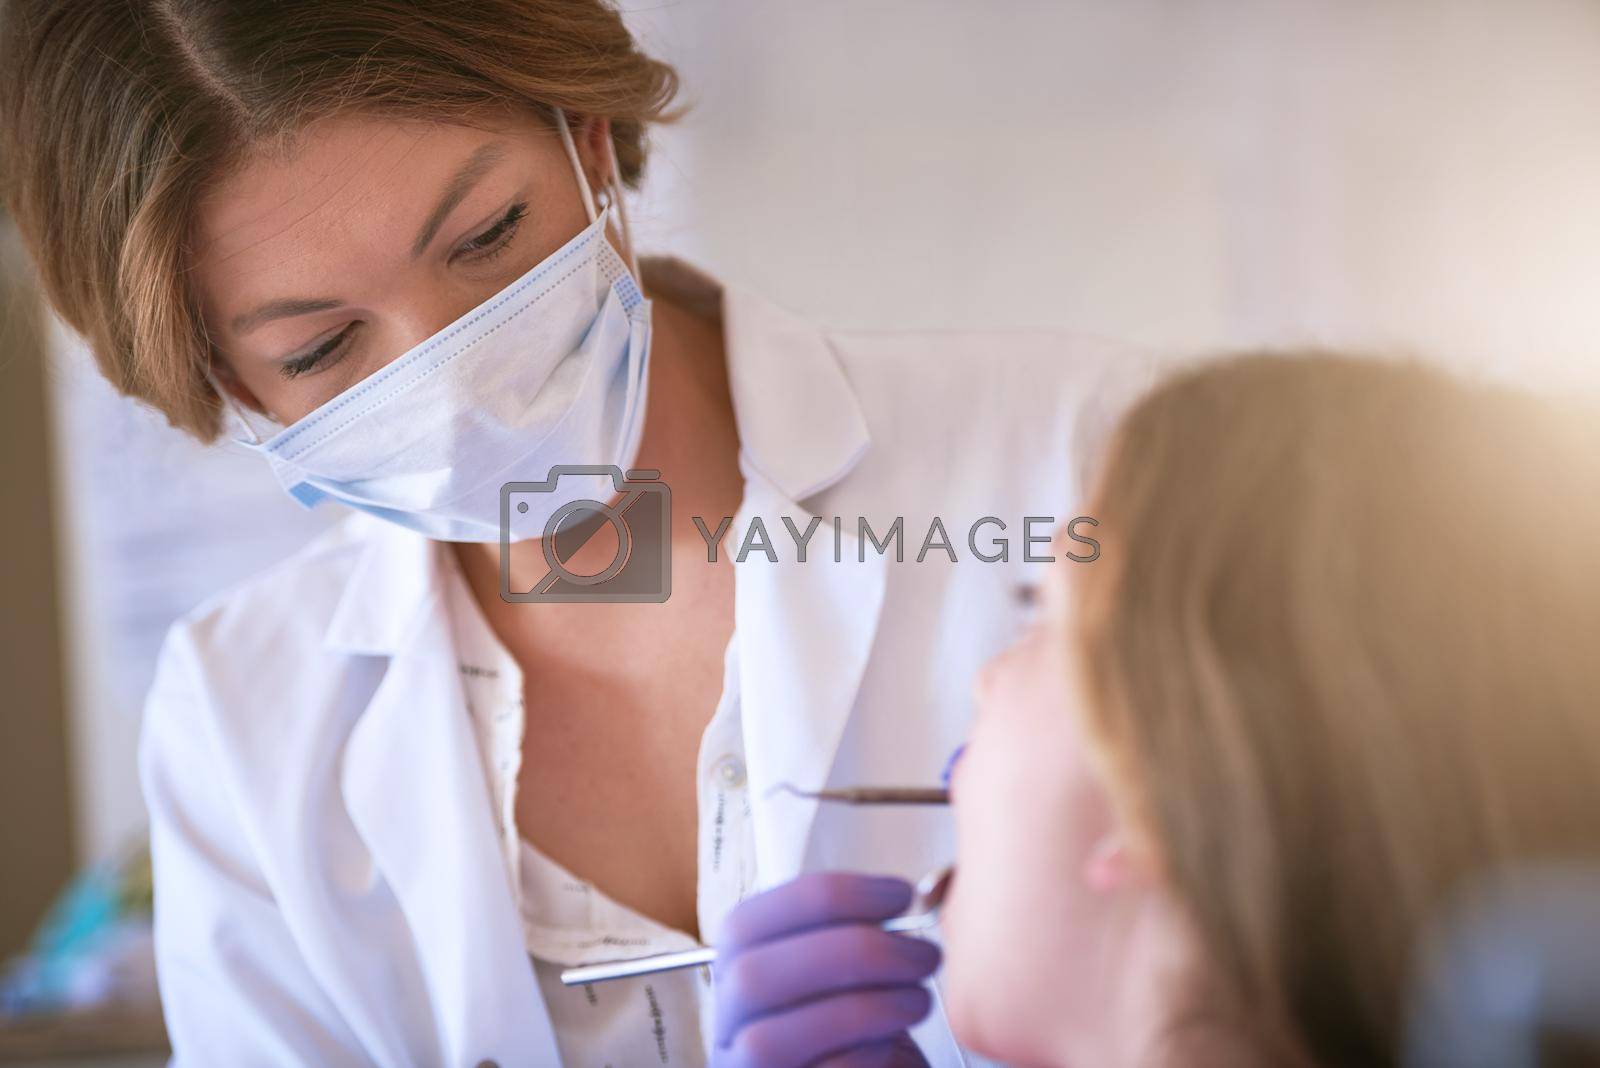 Dental service with a gentle touch. a dentist examining a little girls teeth